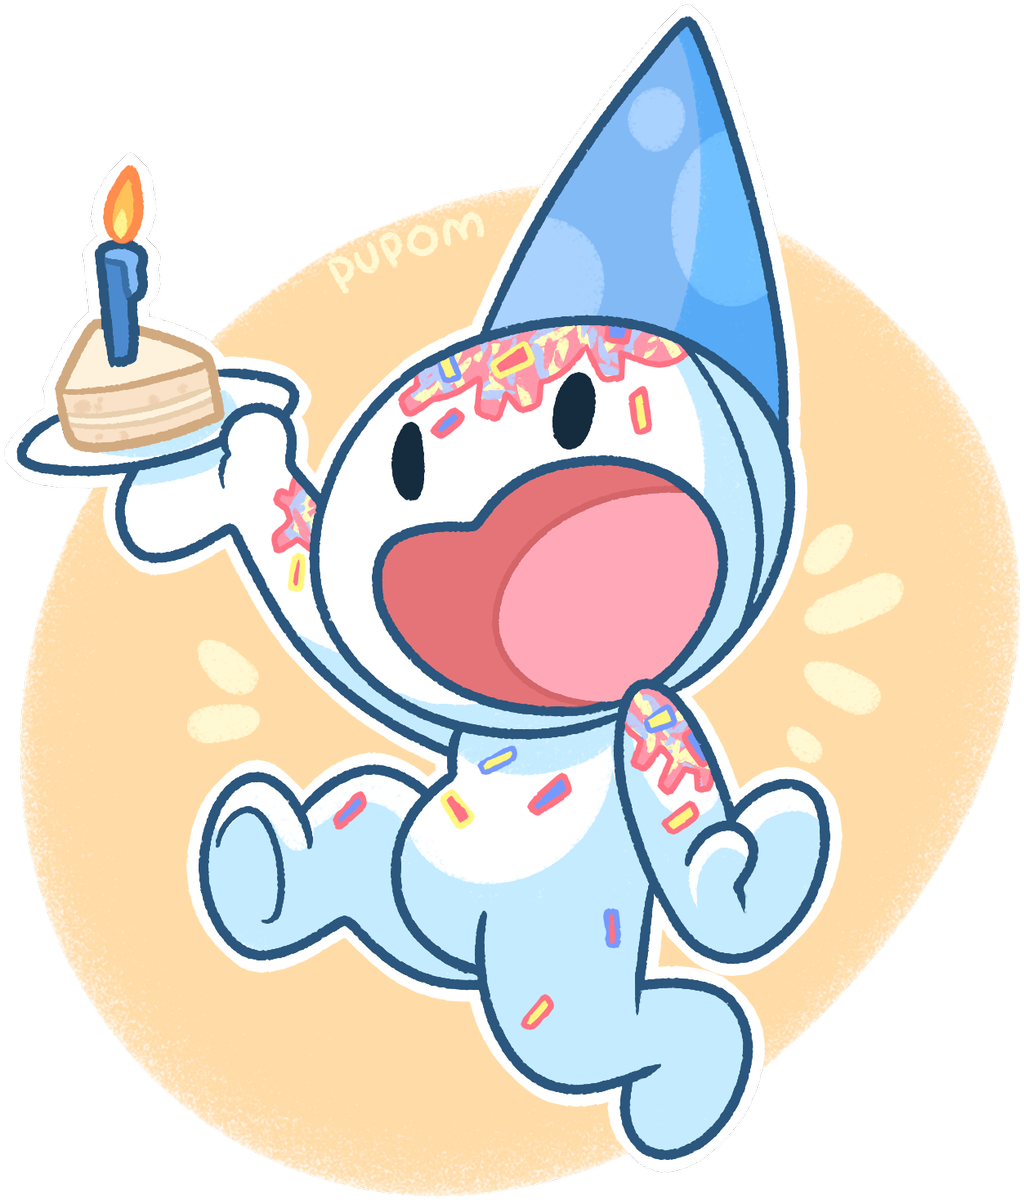 Image result for theodd1sout james fanart. Fan art, Birthday, The odd 1s out